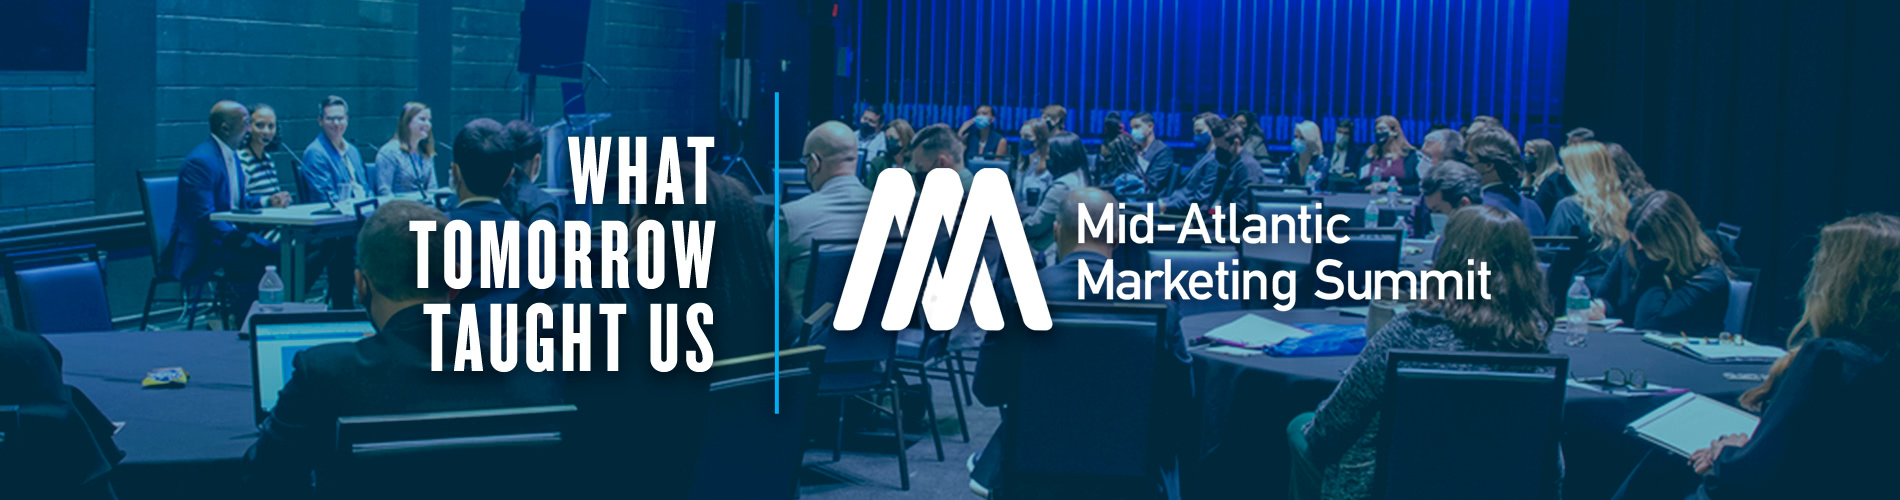 “What Tomorrow Taught Us” at the Mid-Atlantic Marketing Summit: A Summary